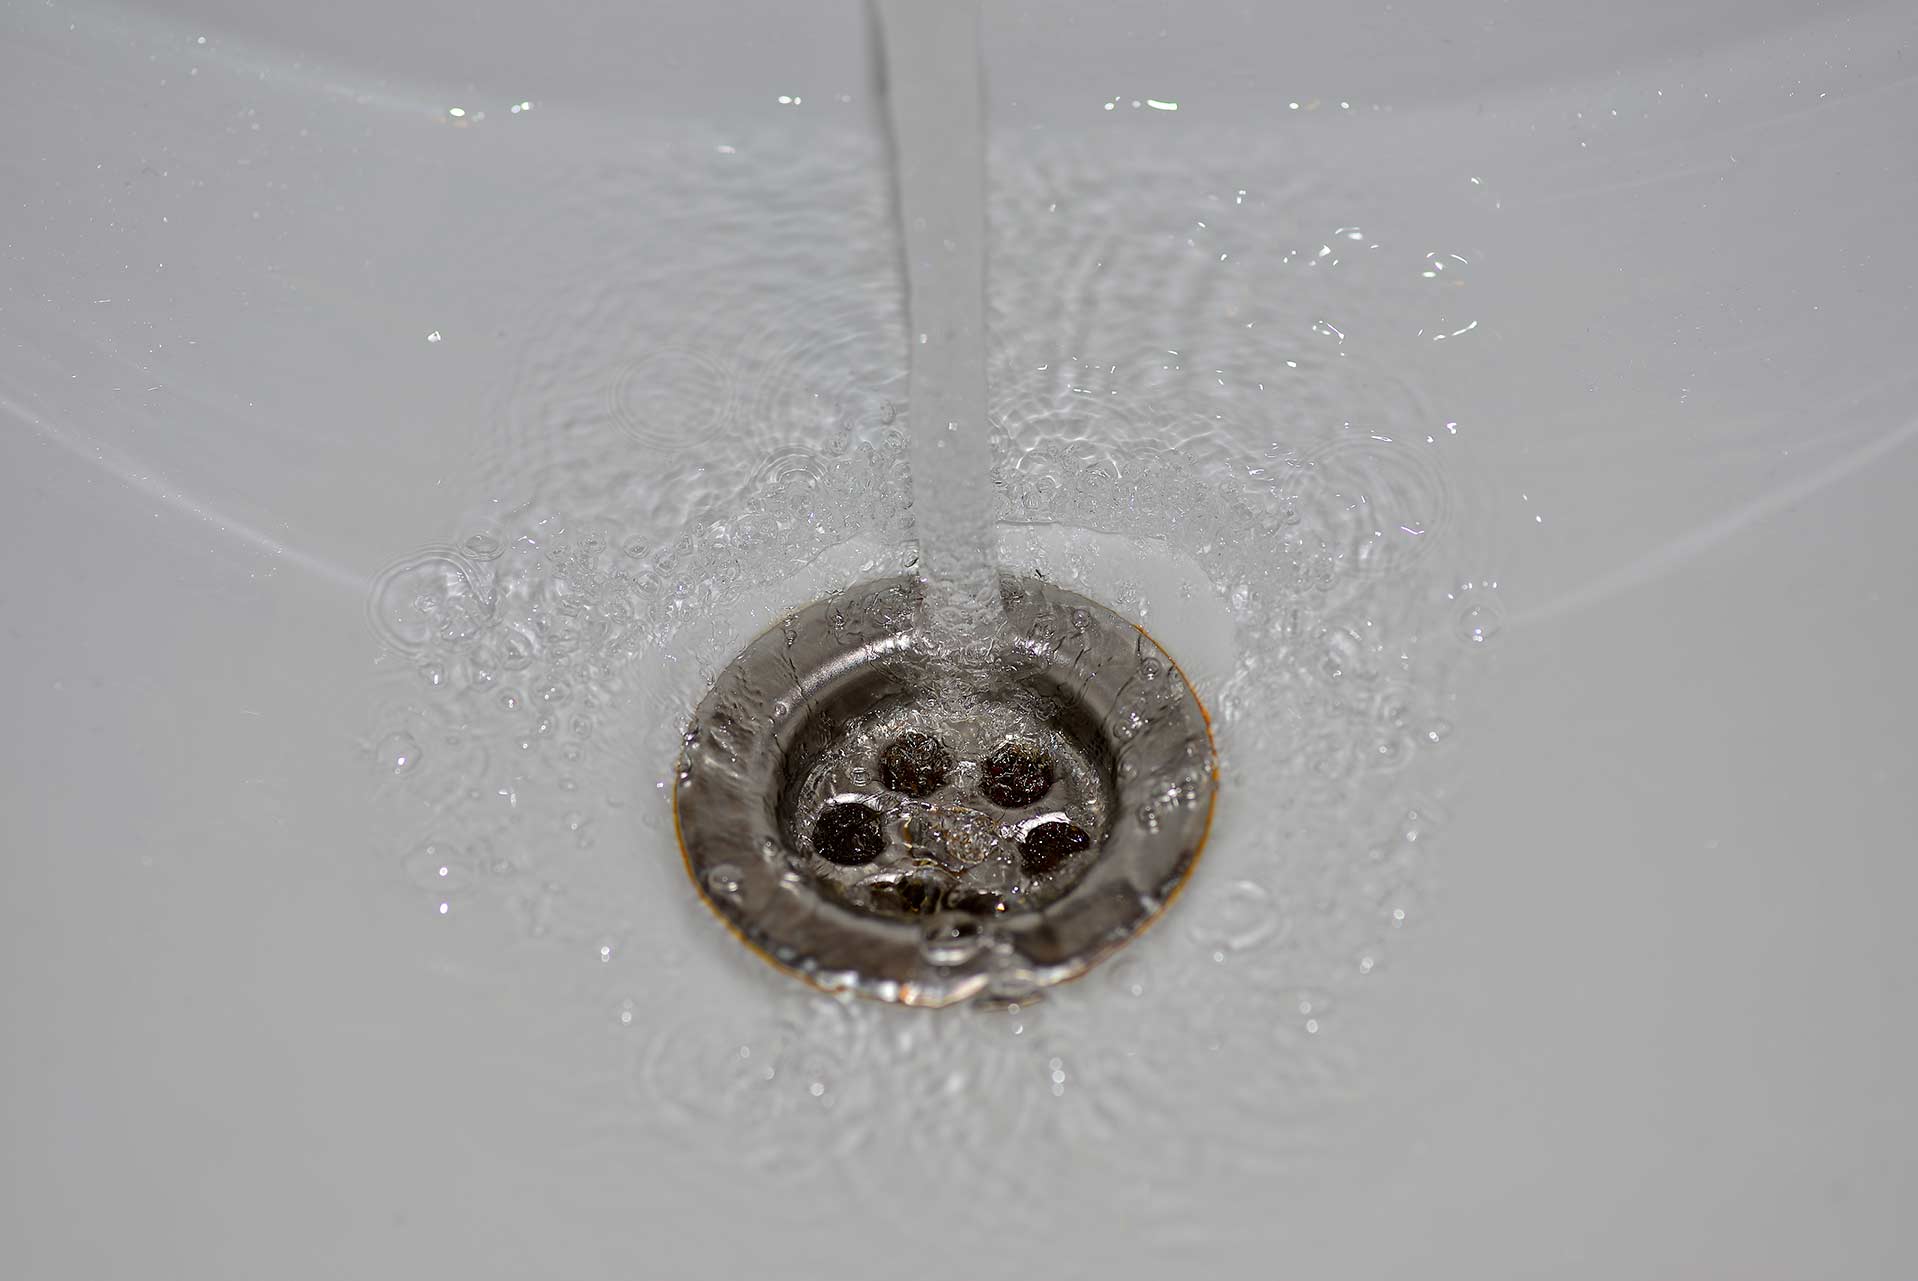 A2B Drains provides services to unblock blocked sinks and drains for properties in Hanworth.